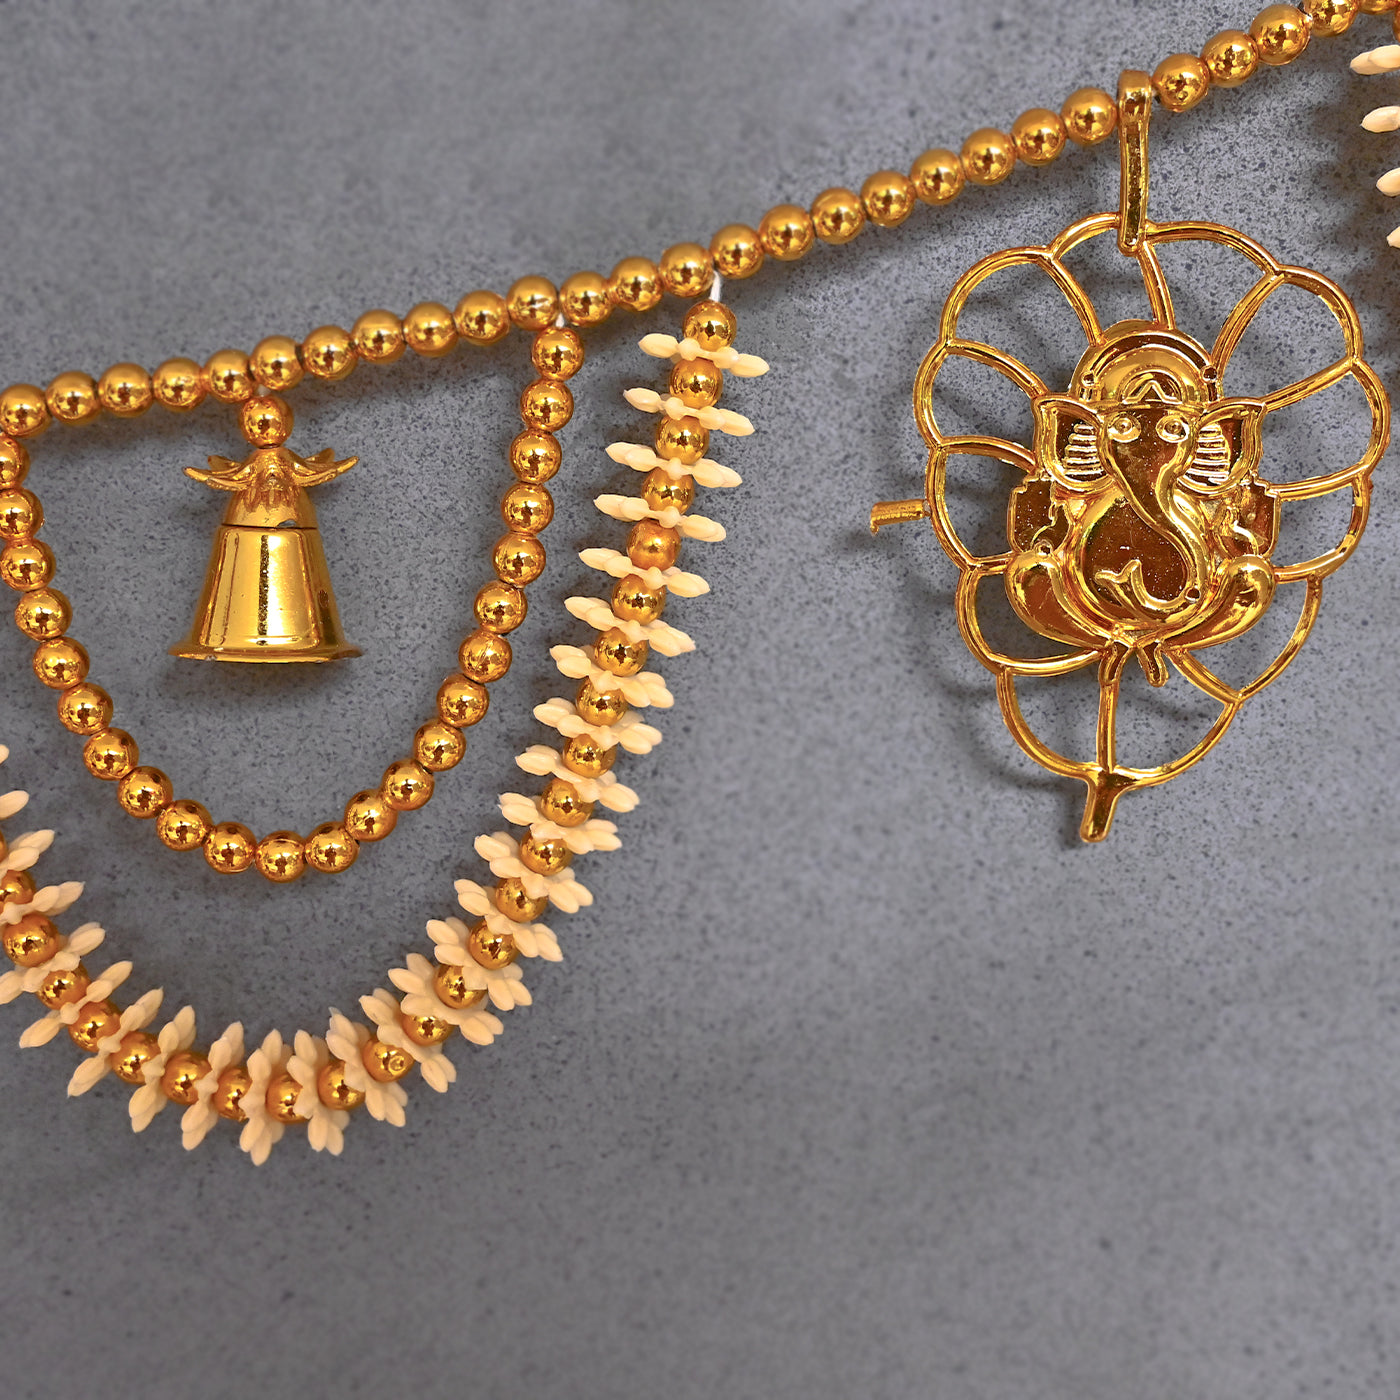 Decorative Hand-Woven Flower Toran with Bell and Lord Ganesha